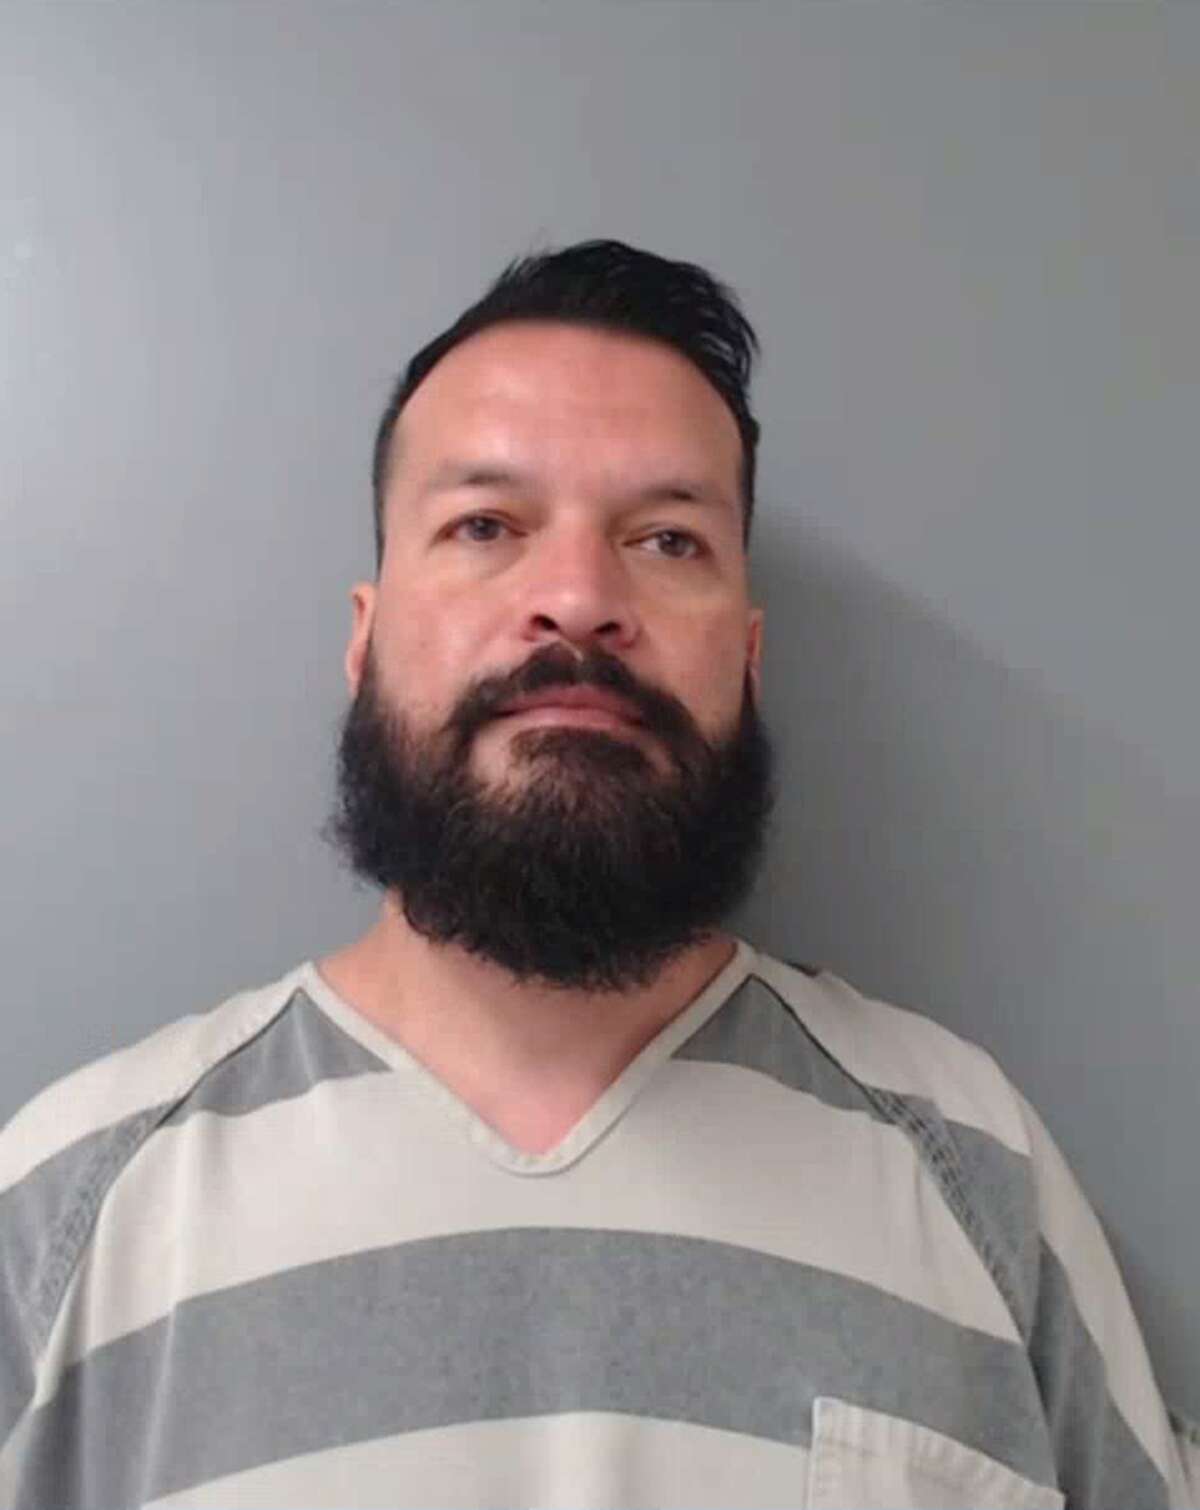 Mario Alberto Galvan, 43, was charged with injury to a child.